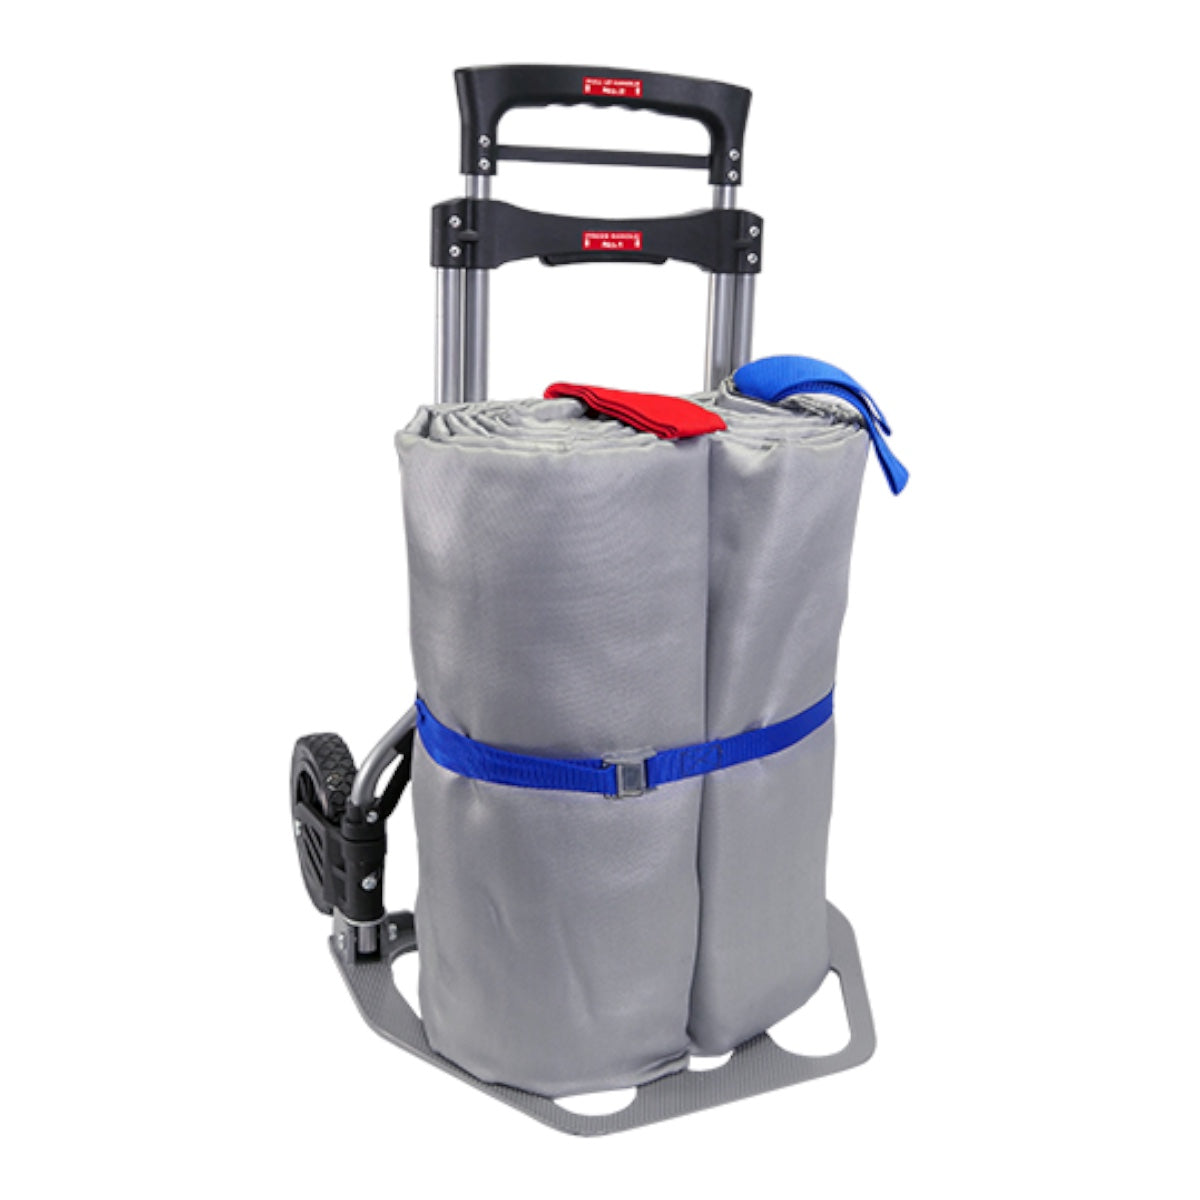 Fire containment ceiling WS 500 (B1) including trolley and protective cover